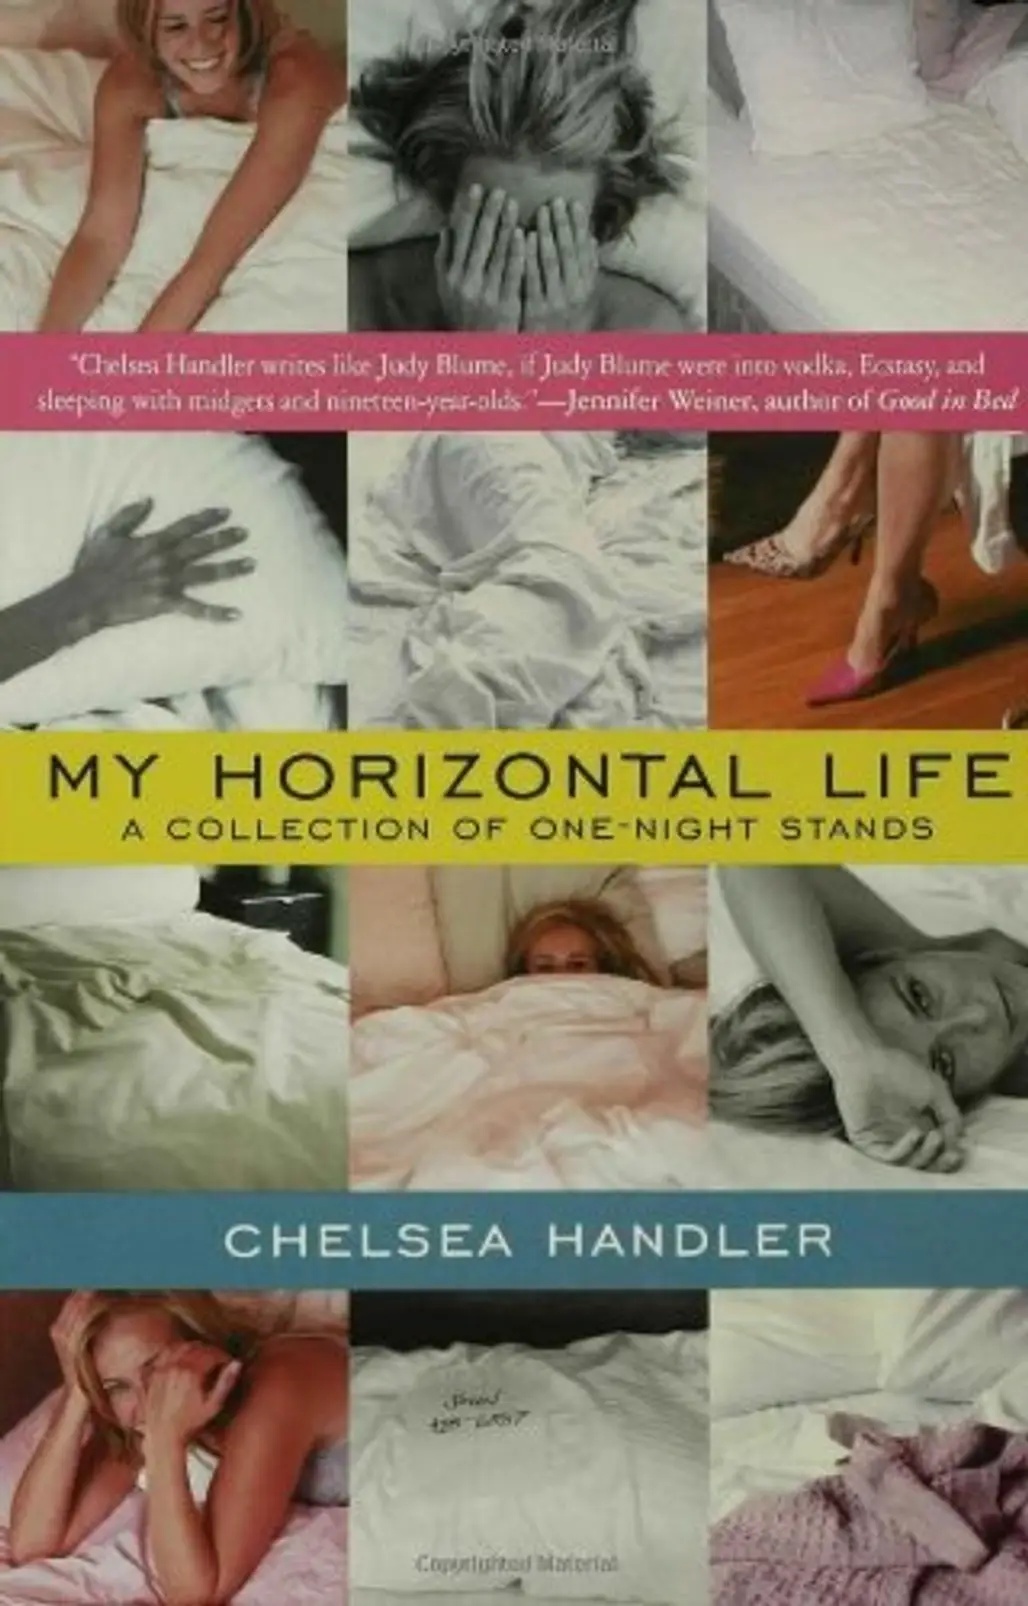 “My Horizontal Life” (or Anything else, for That Matter) by Chelsea Handler